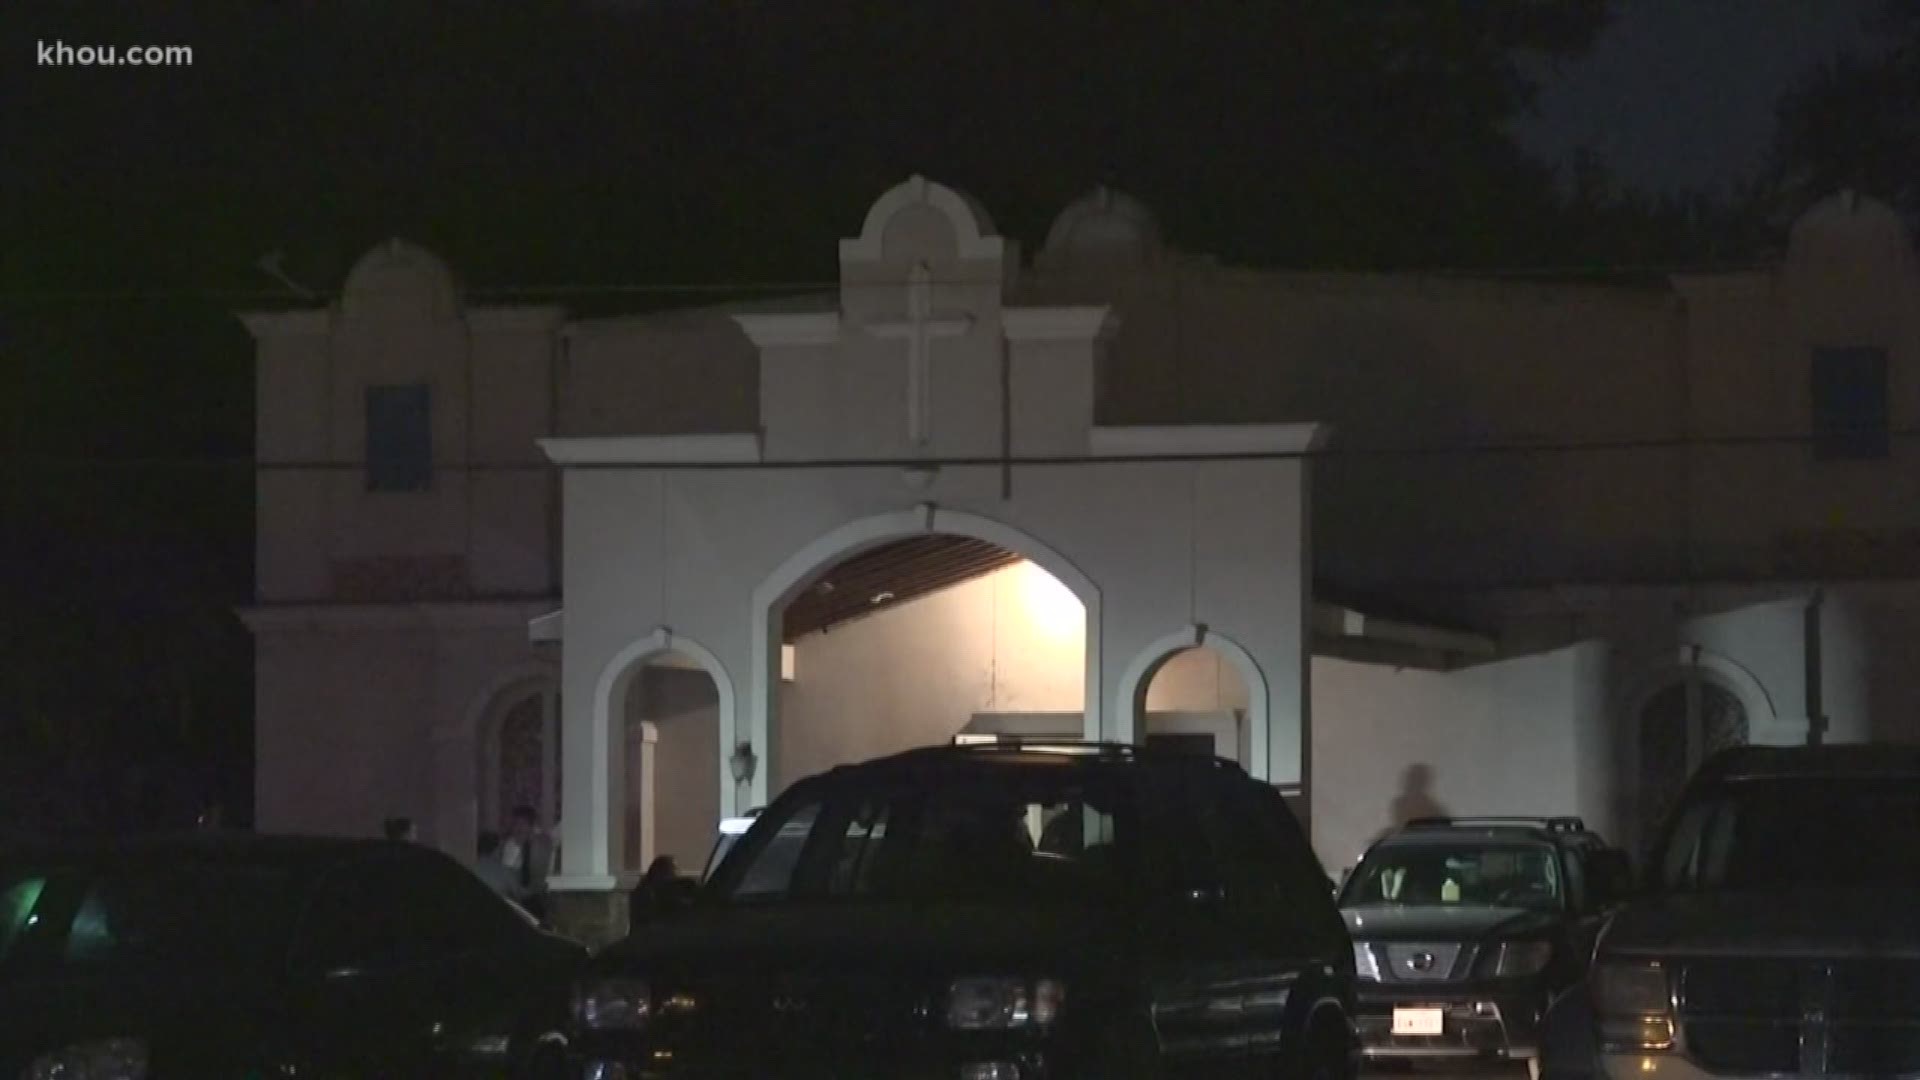 A young boy has died after he was crushed by a large table at a church, according to Harris County Sheriff's deputies.